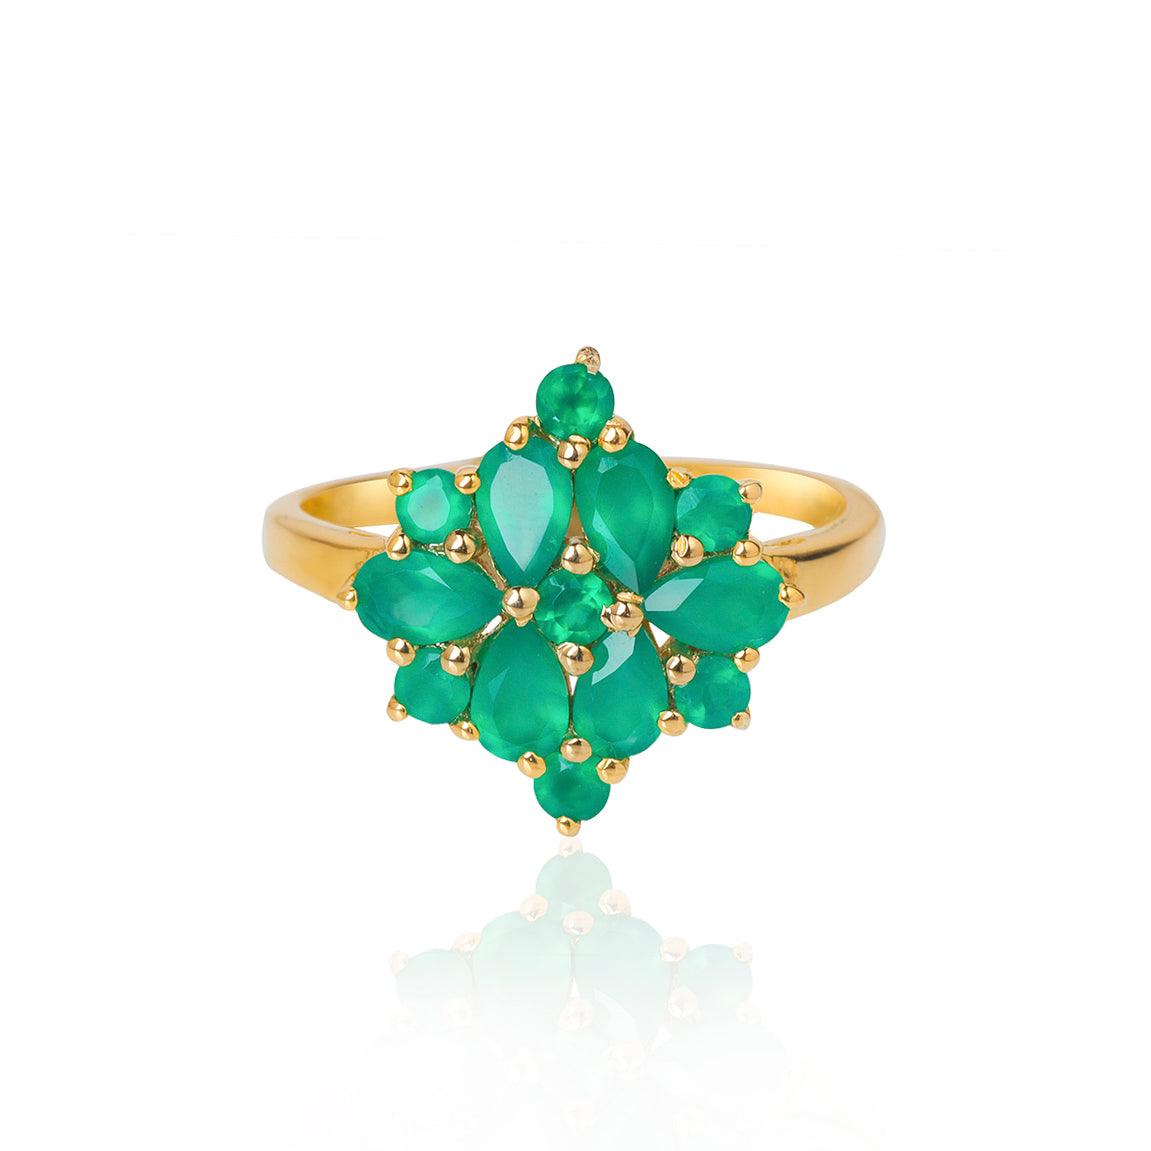 Green Onyx Cluster Ring 14k Gold Over 925 Silver - YoTreasure